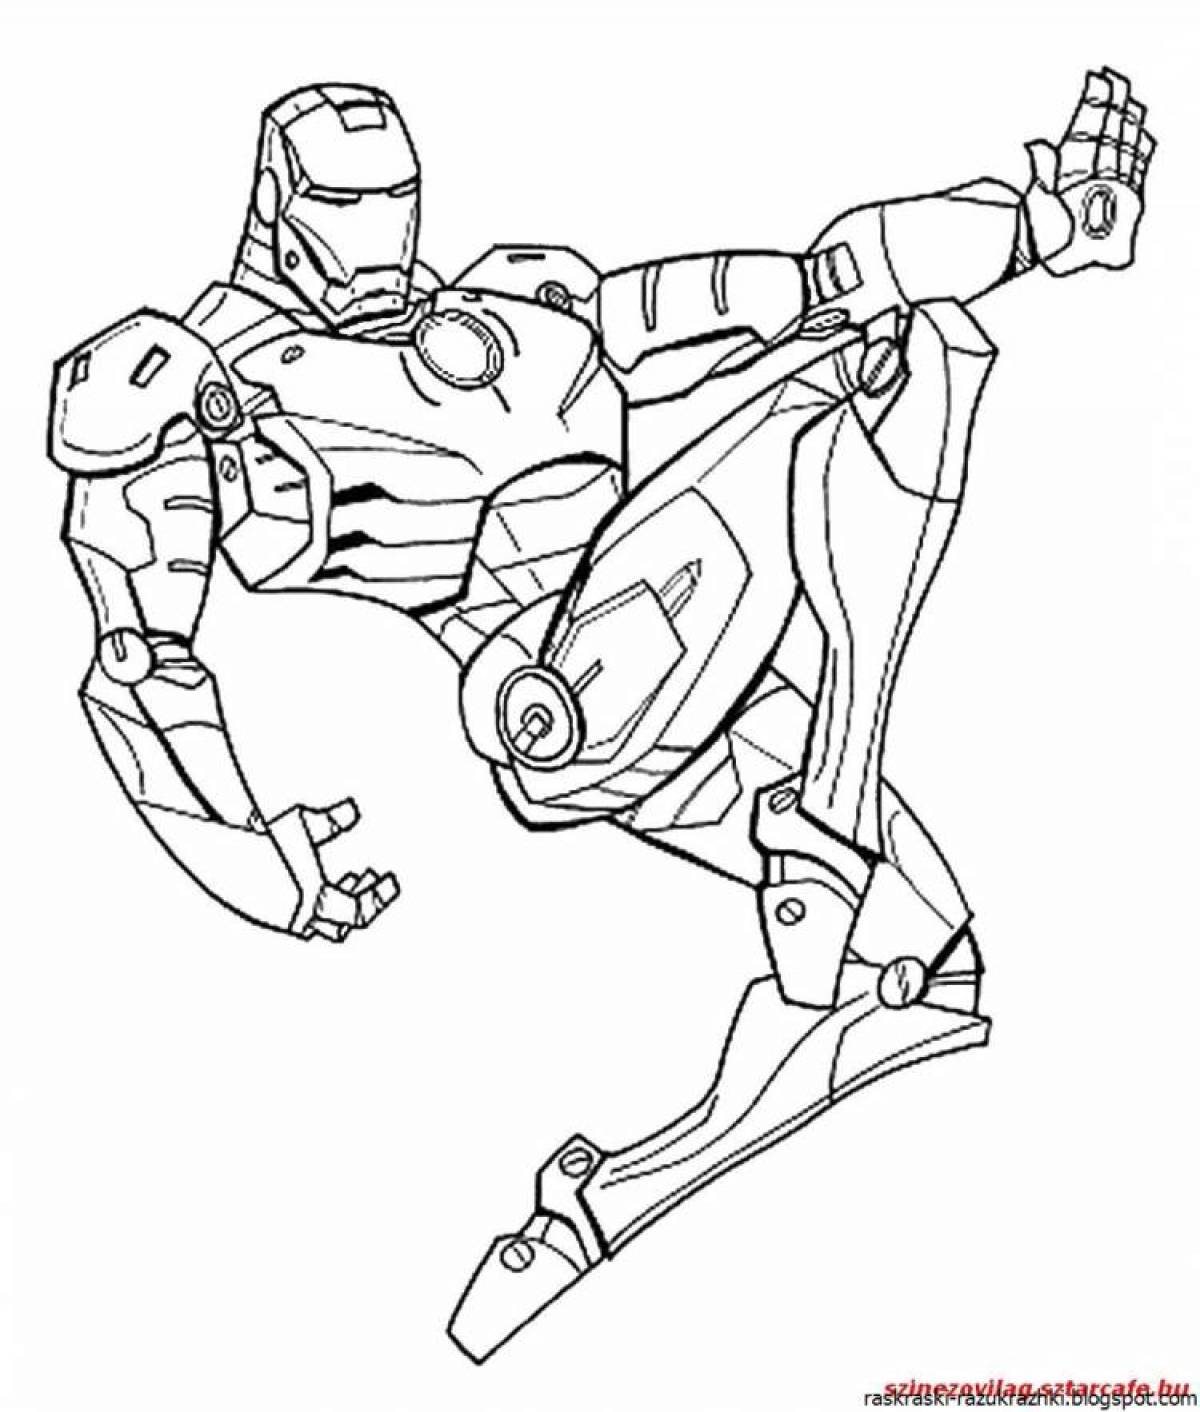 Flawless amanghast coloring page